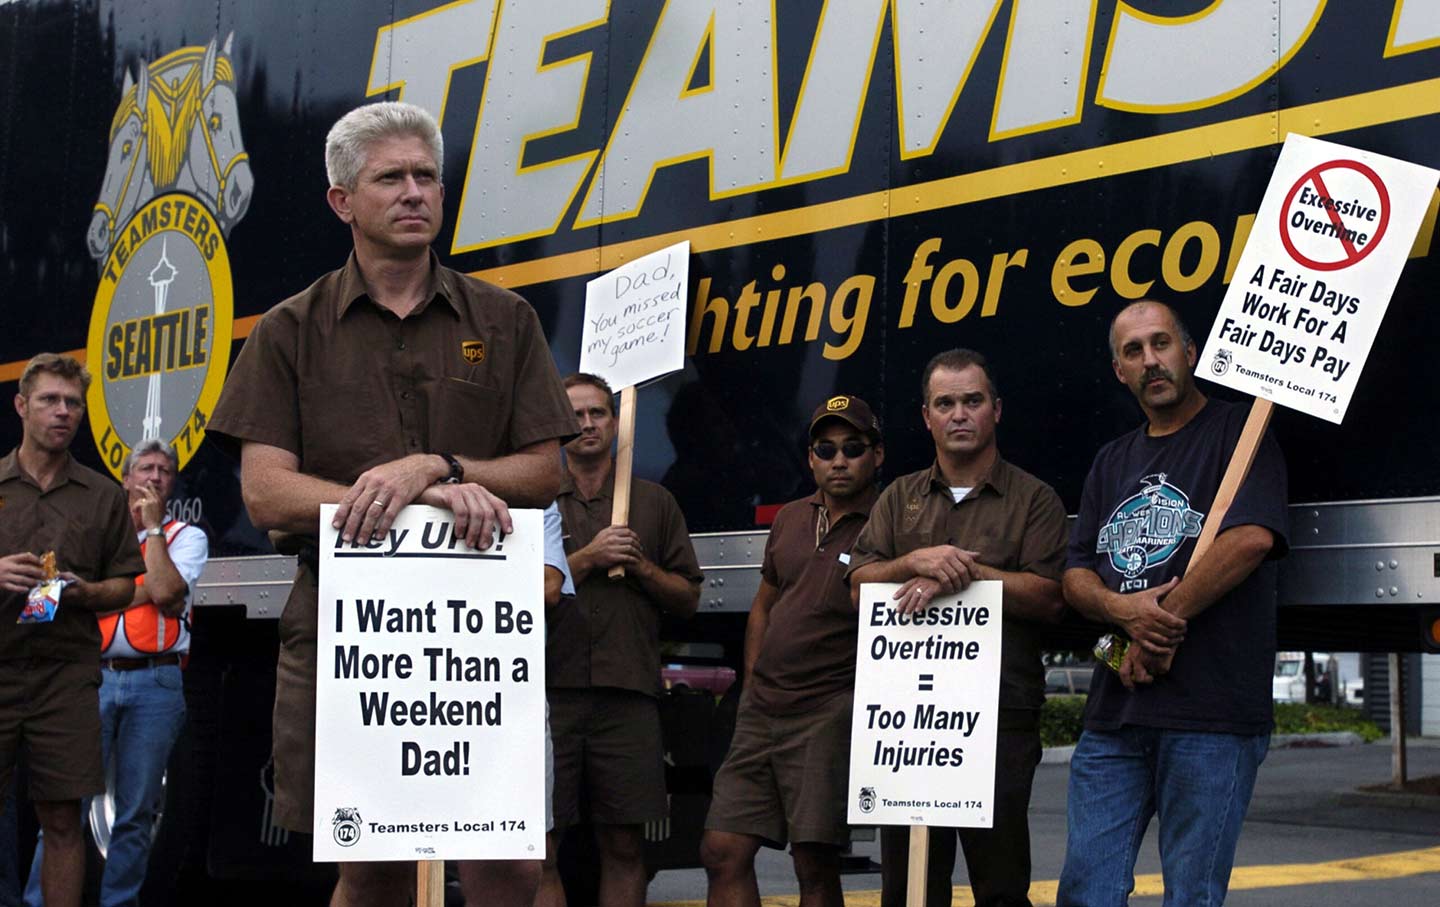 Teamster protest in 2004 in Seattle, WA.